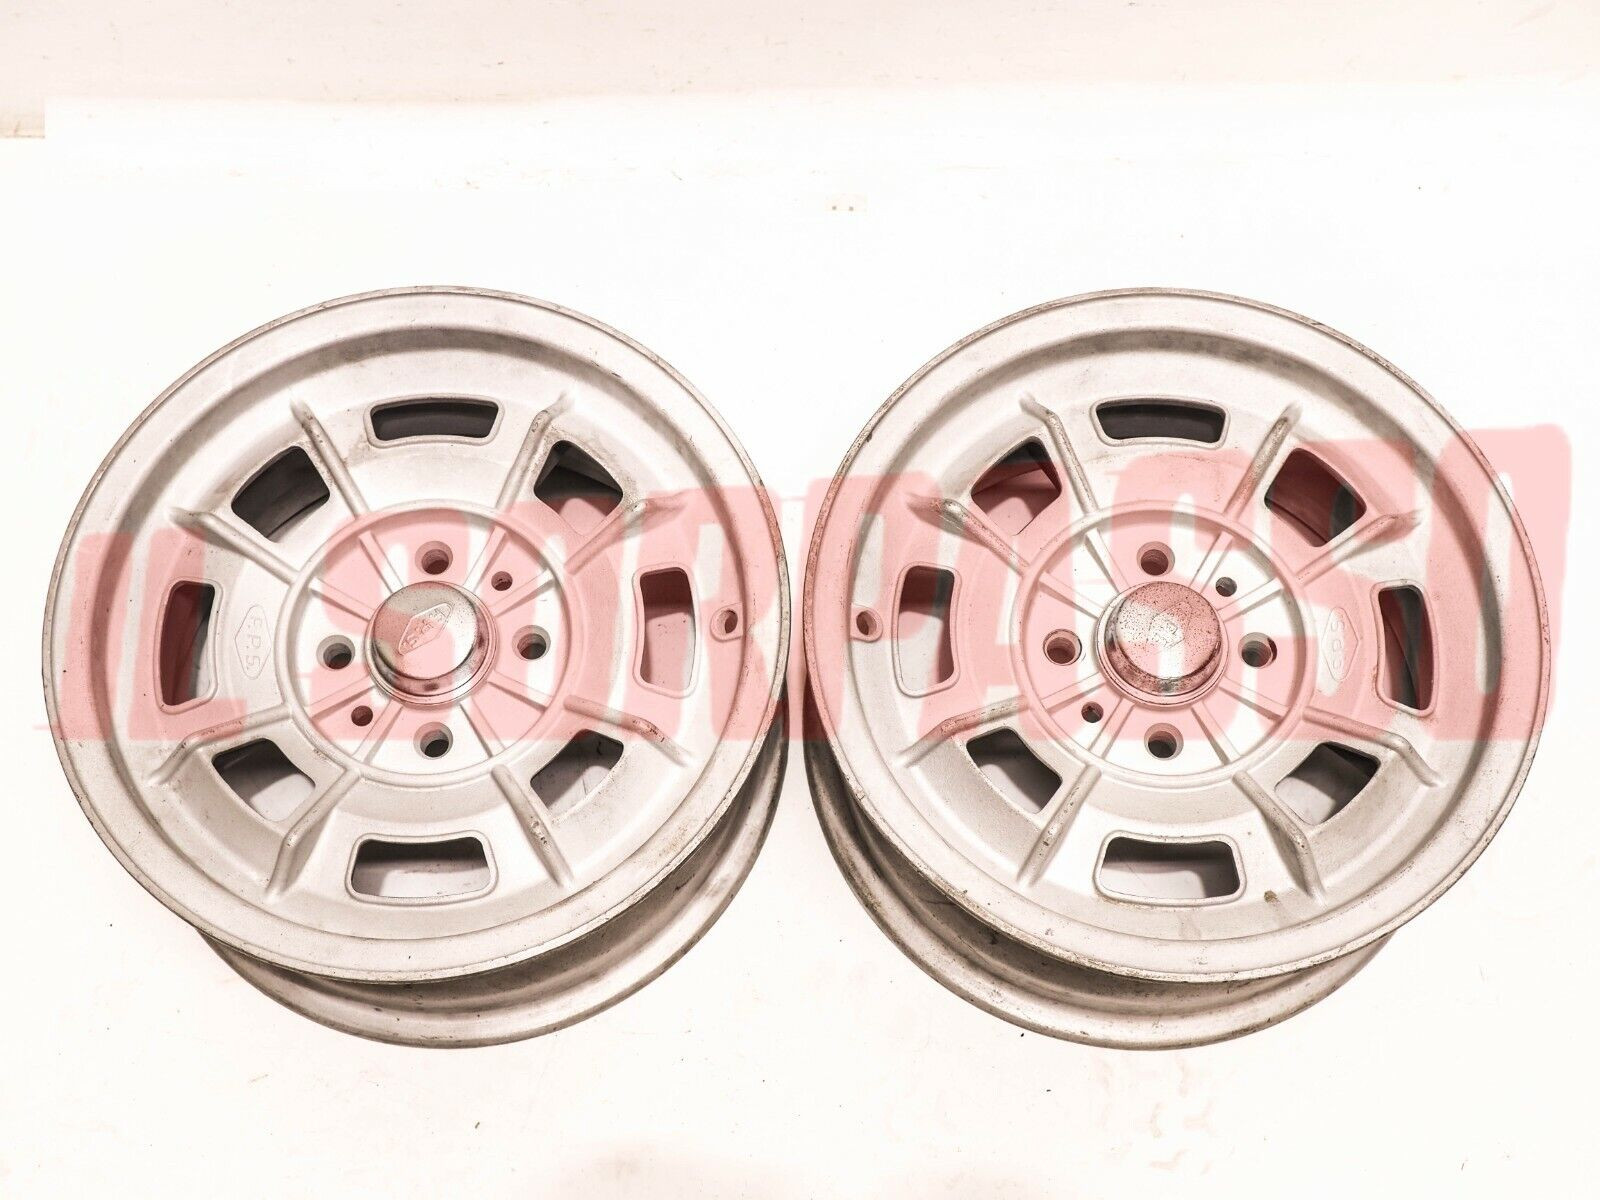 CERCHI RUOTA FPS 6x13 FIAT 850 124 COUPE SPIDER 125 127 128 131 X19 A112 ABARTH